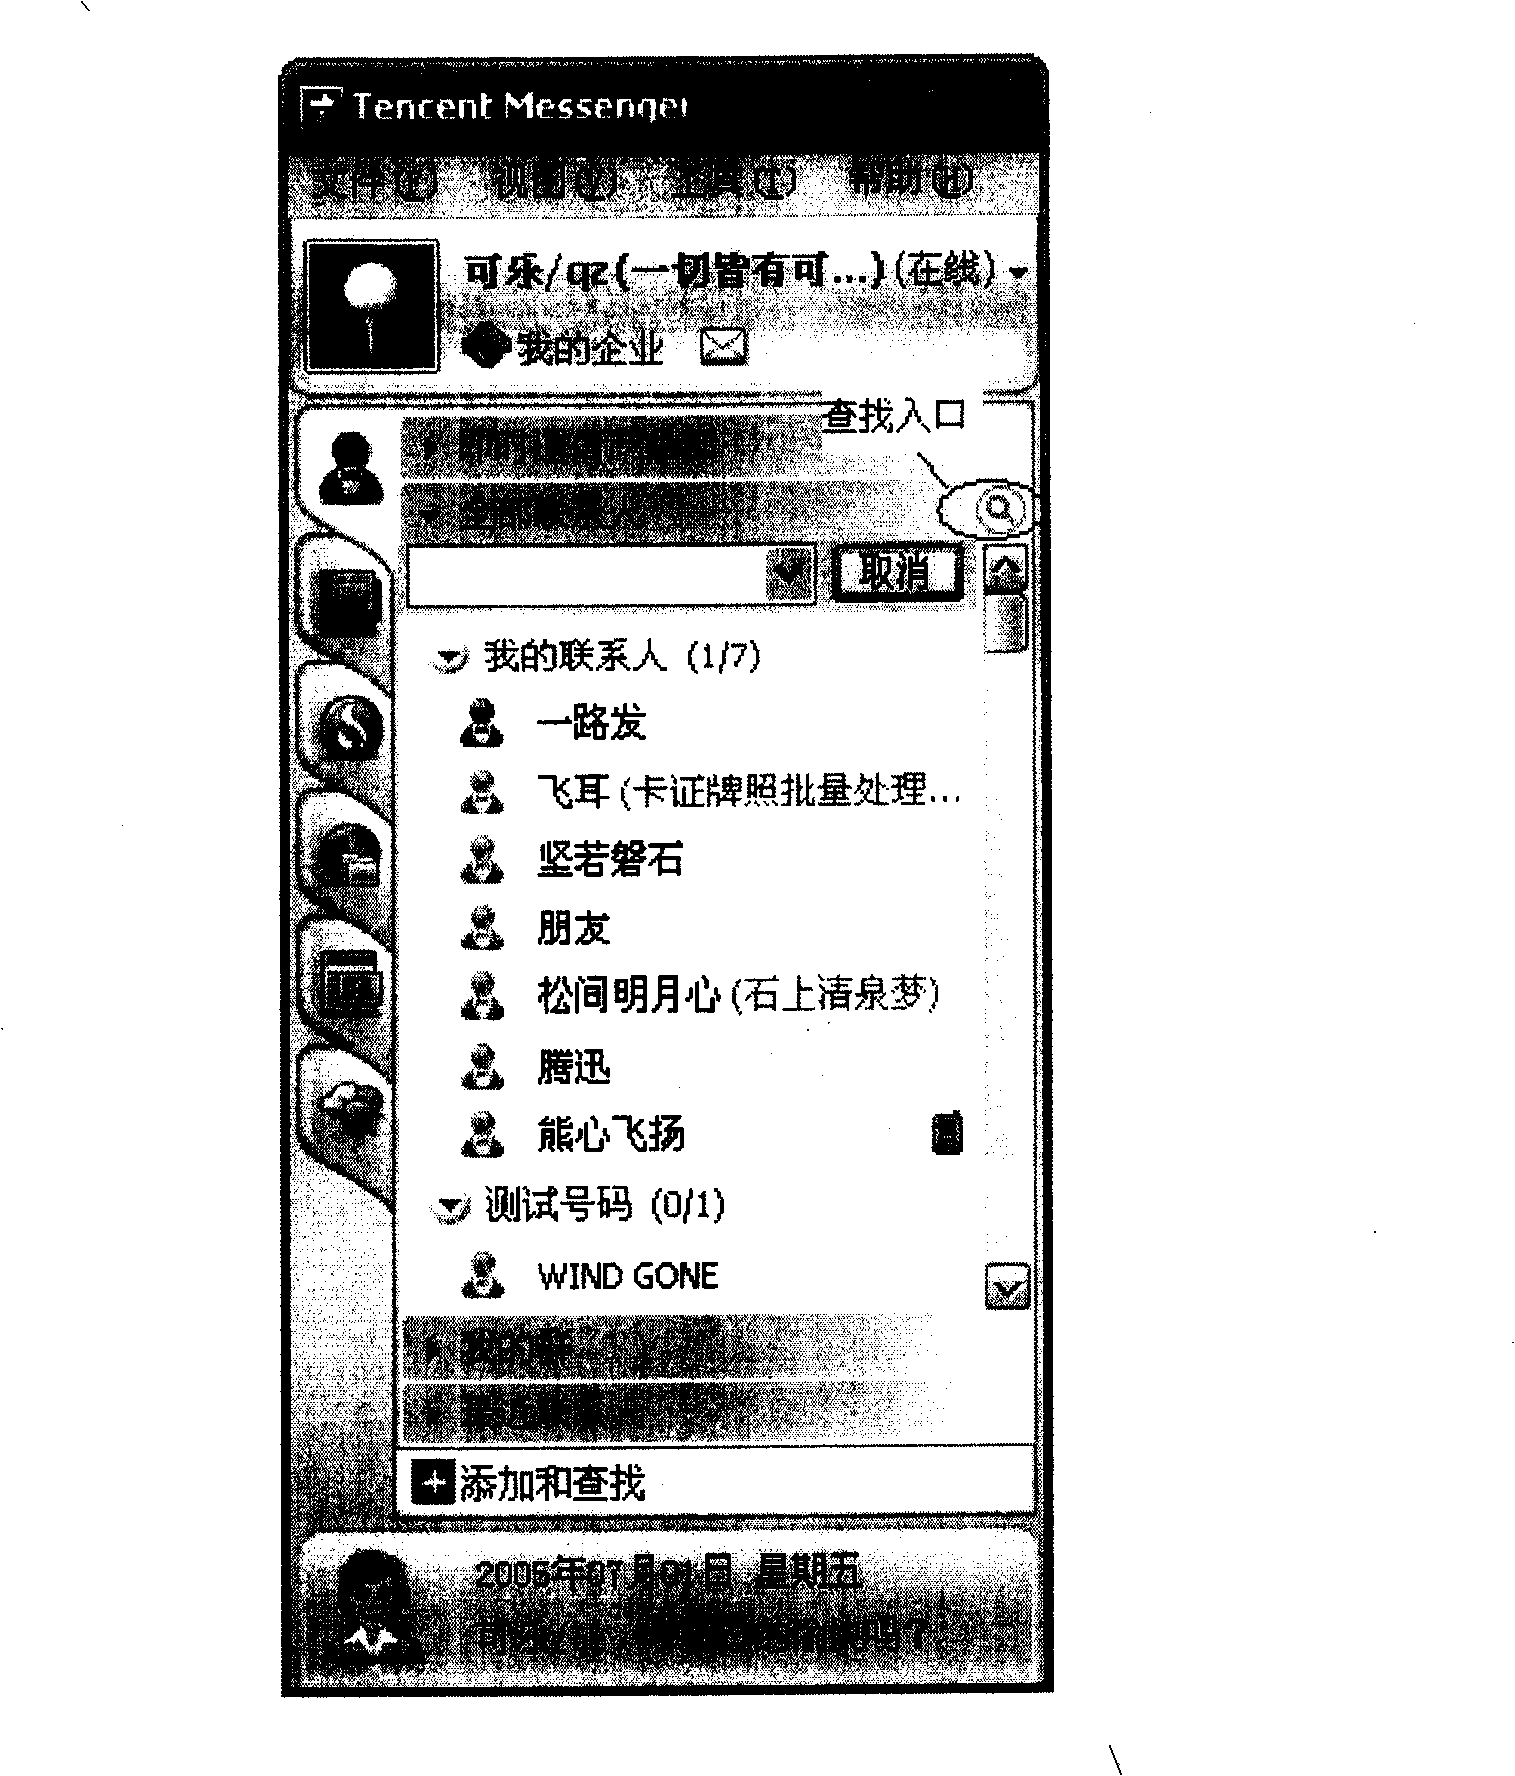 Method for fast searching person to contact in instant telecommunication